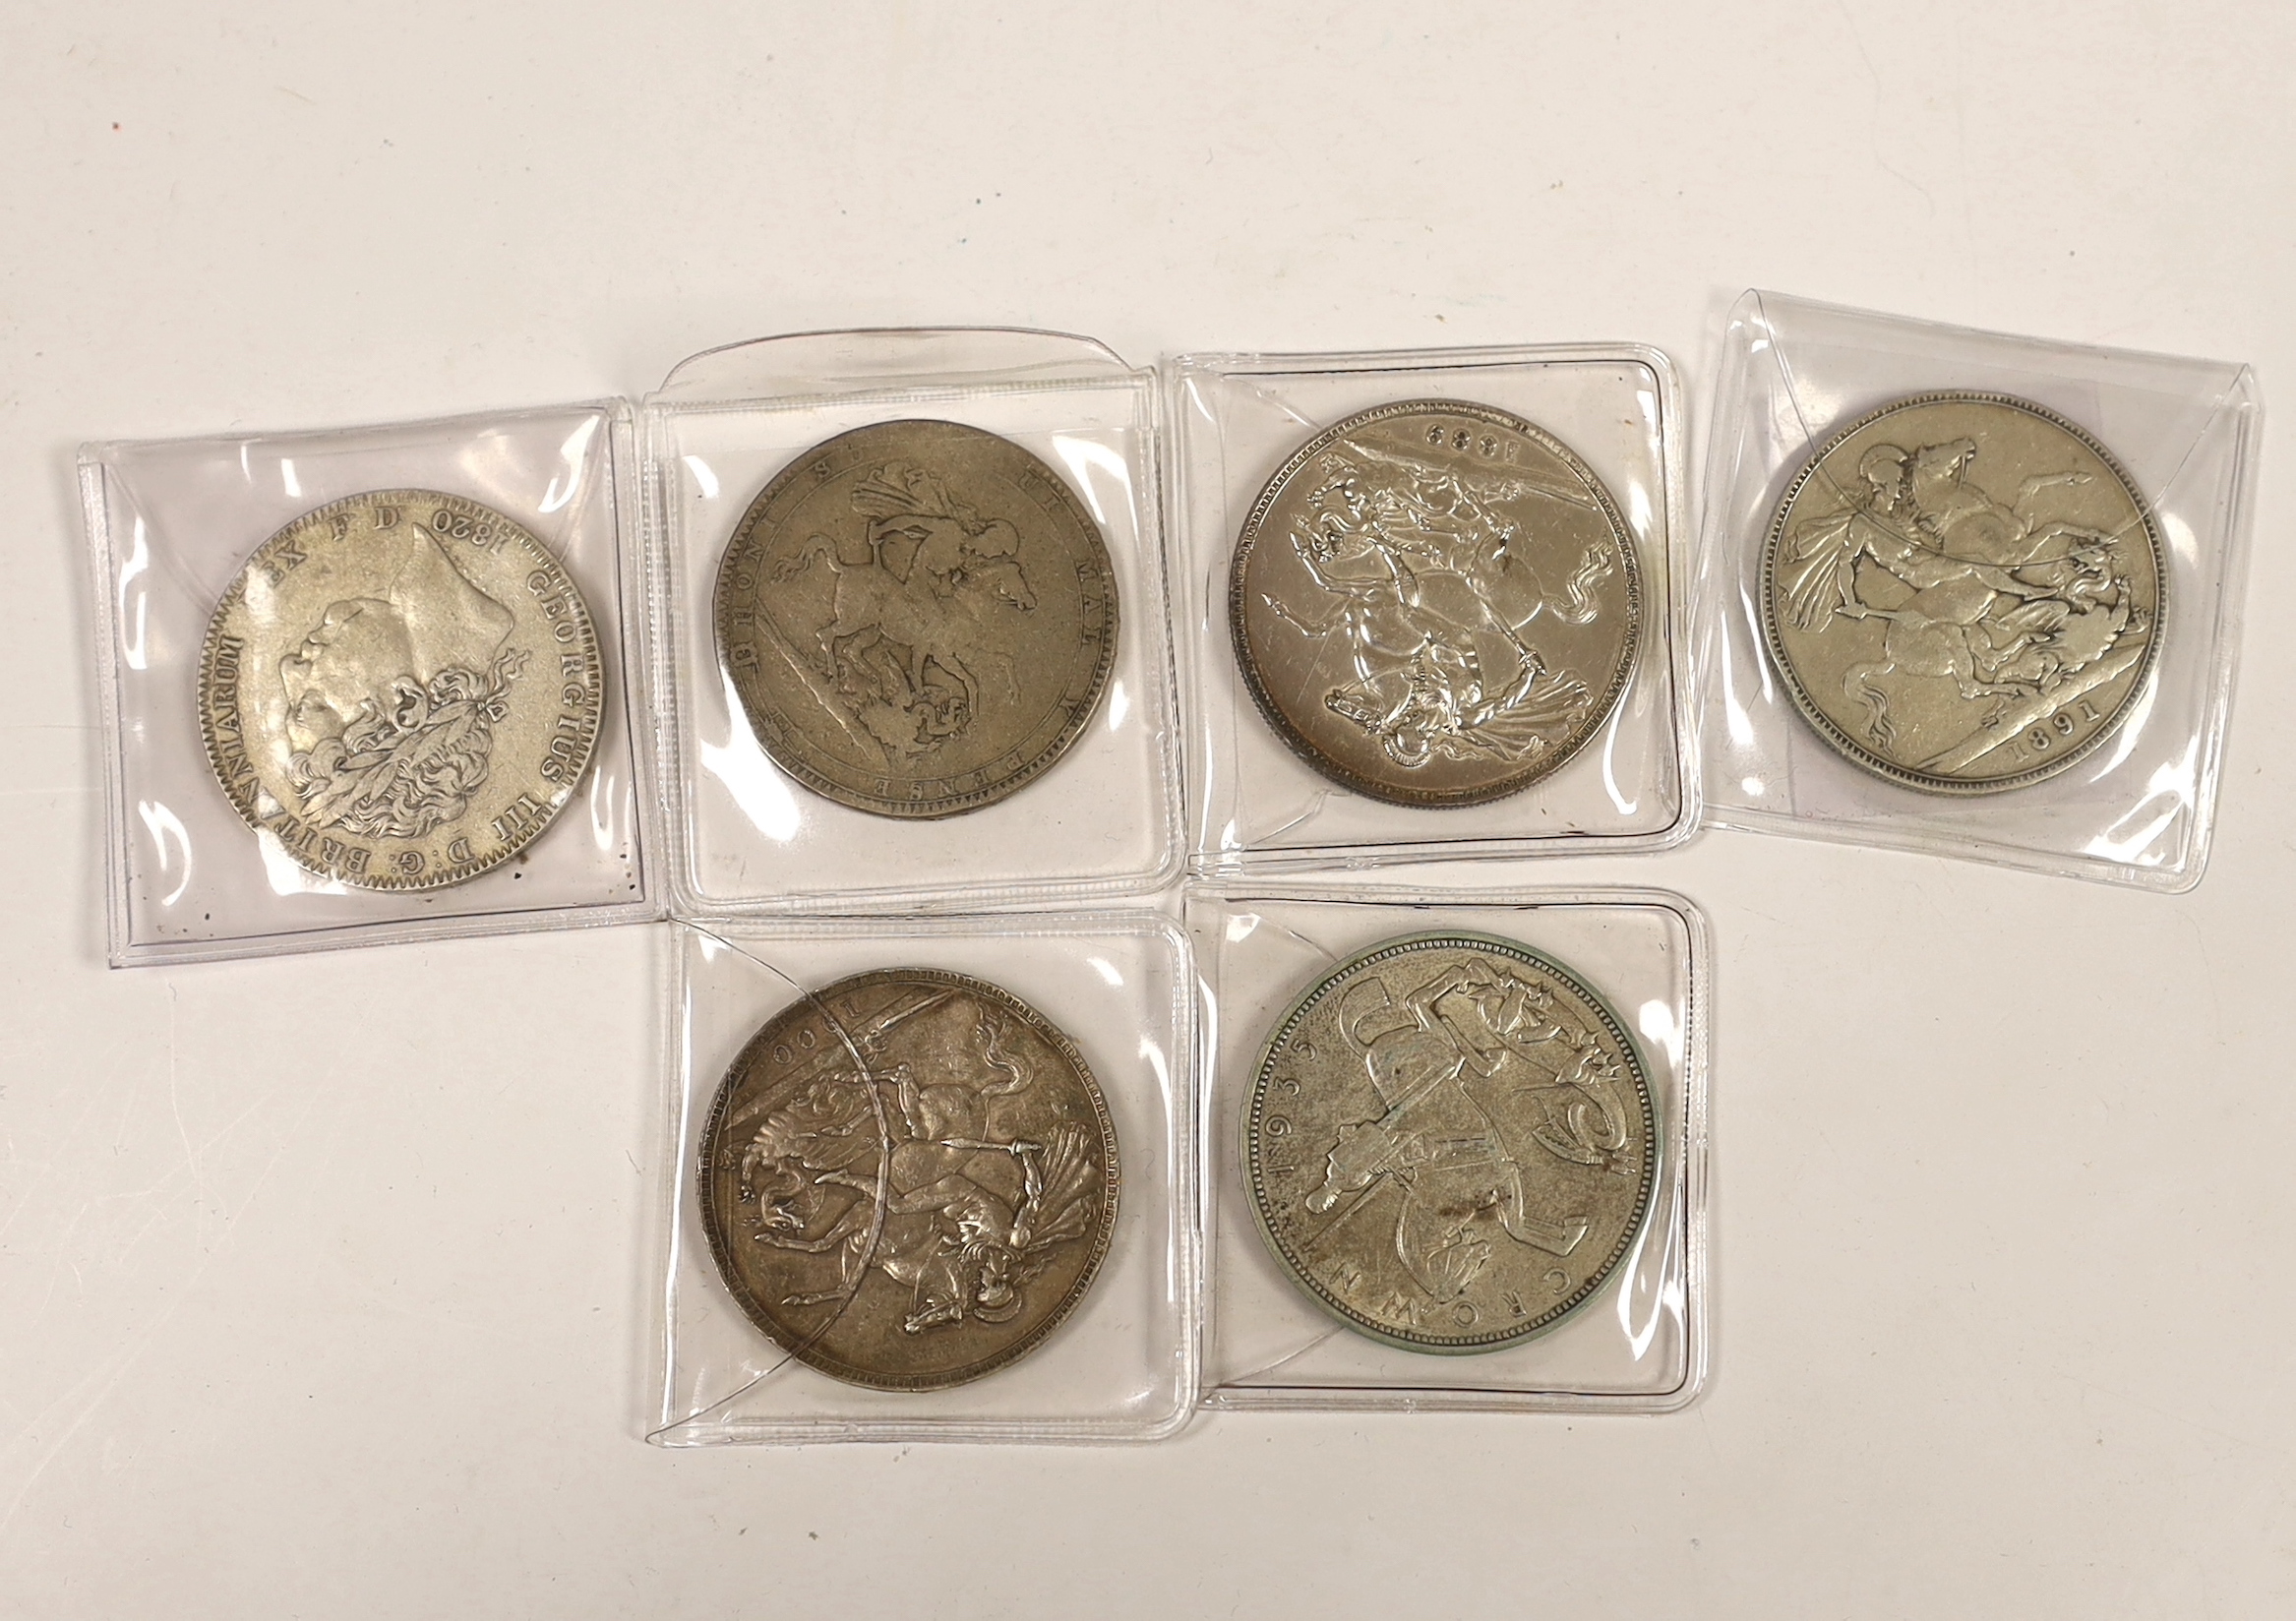 British silver crowns, George III 1820, Fine or better, 1819, Victoria 1889, good VF, 1891, 1900, VF and George V 1935